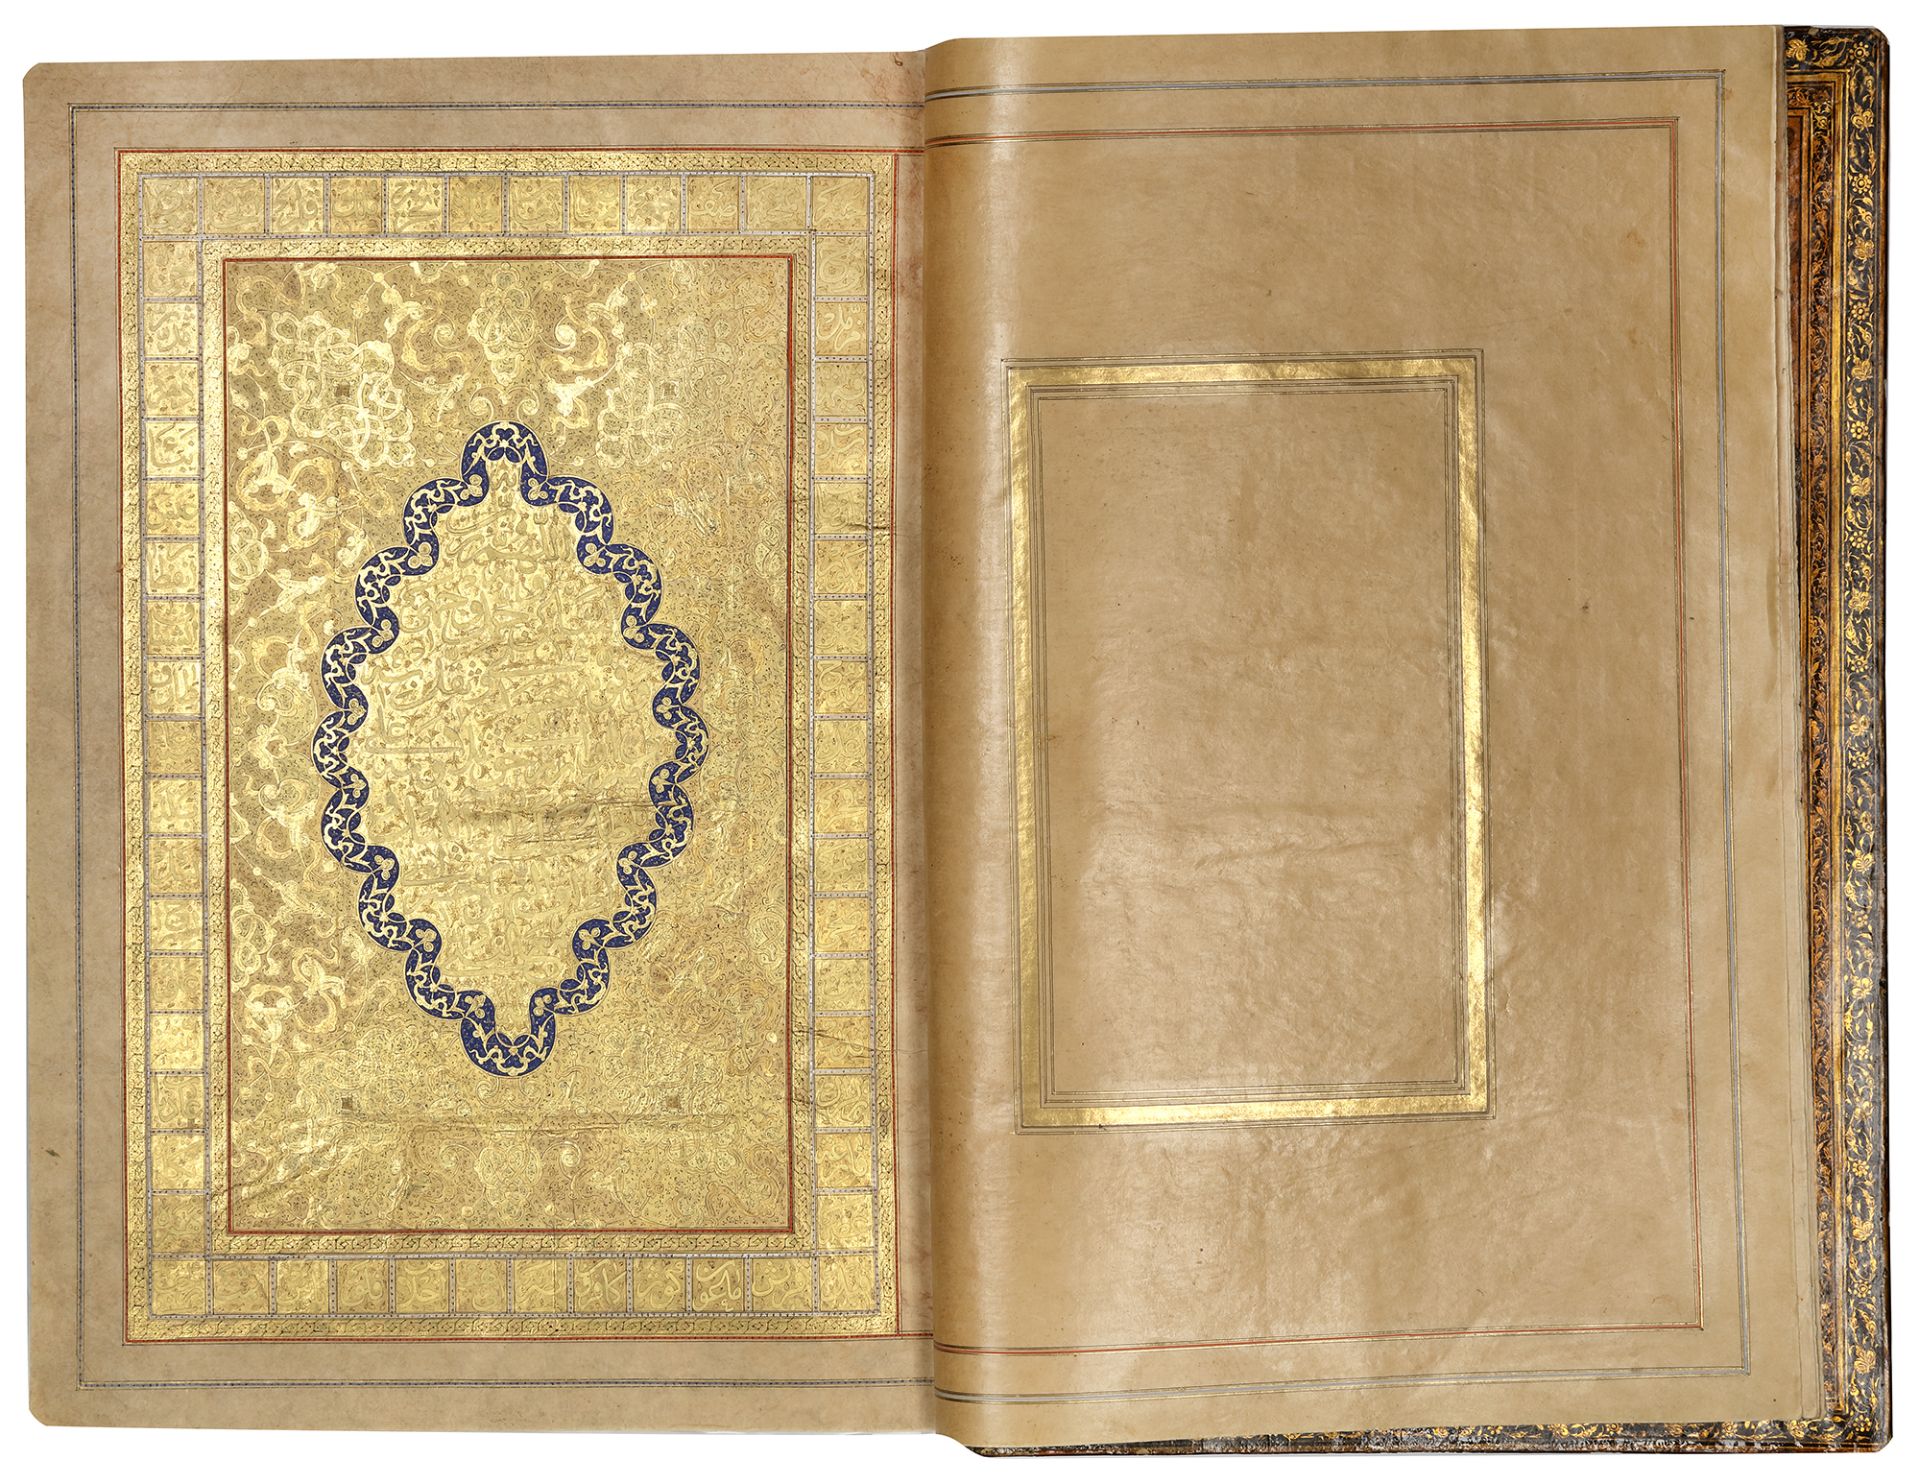 AN EXCEPTIONAL ILLUMINATED SAFAVID QURAN (POSSIBLY SHIRAZ), SECOND HALF 16TH CENTURY, WITH AN ADDITI - Image 7 of 14